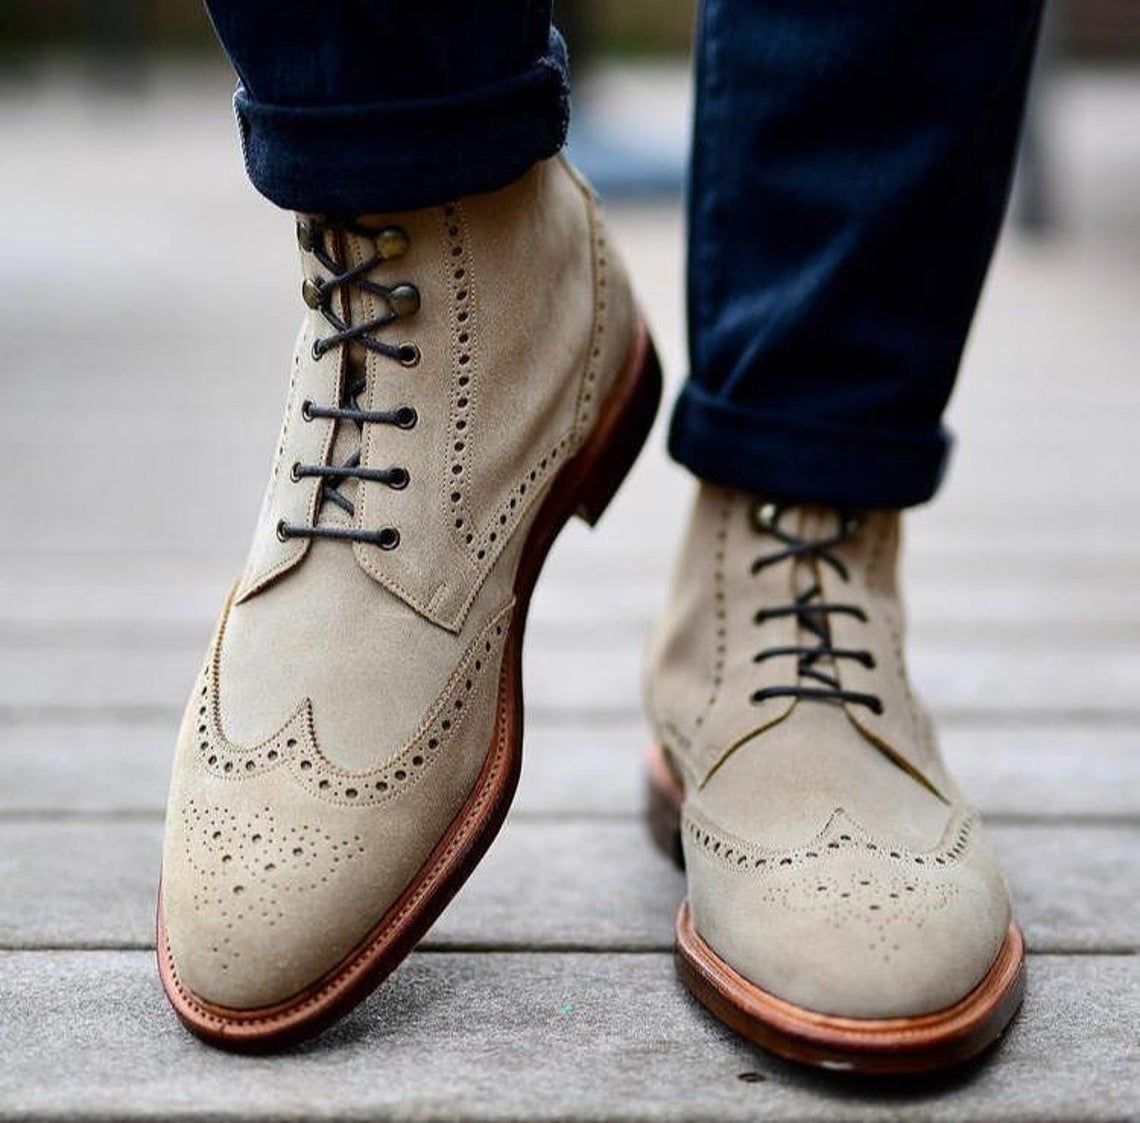 Bespoke Men's Wing Tip OFF White Suede Leather Ankle High Formal Leather Boots